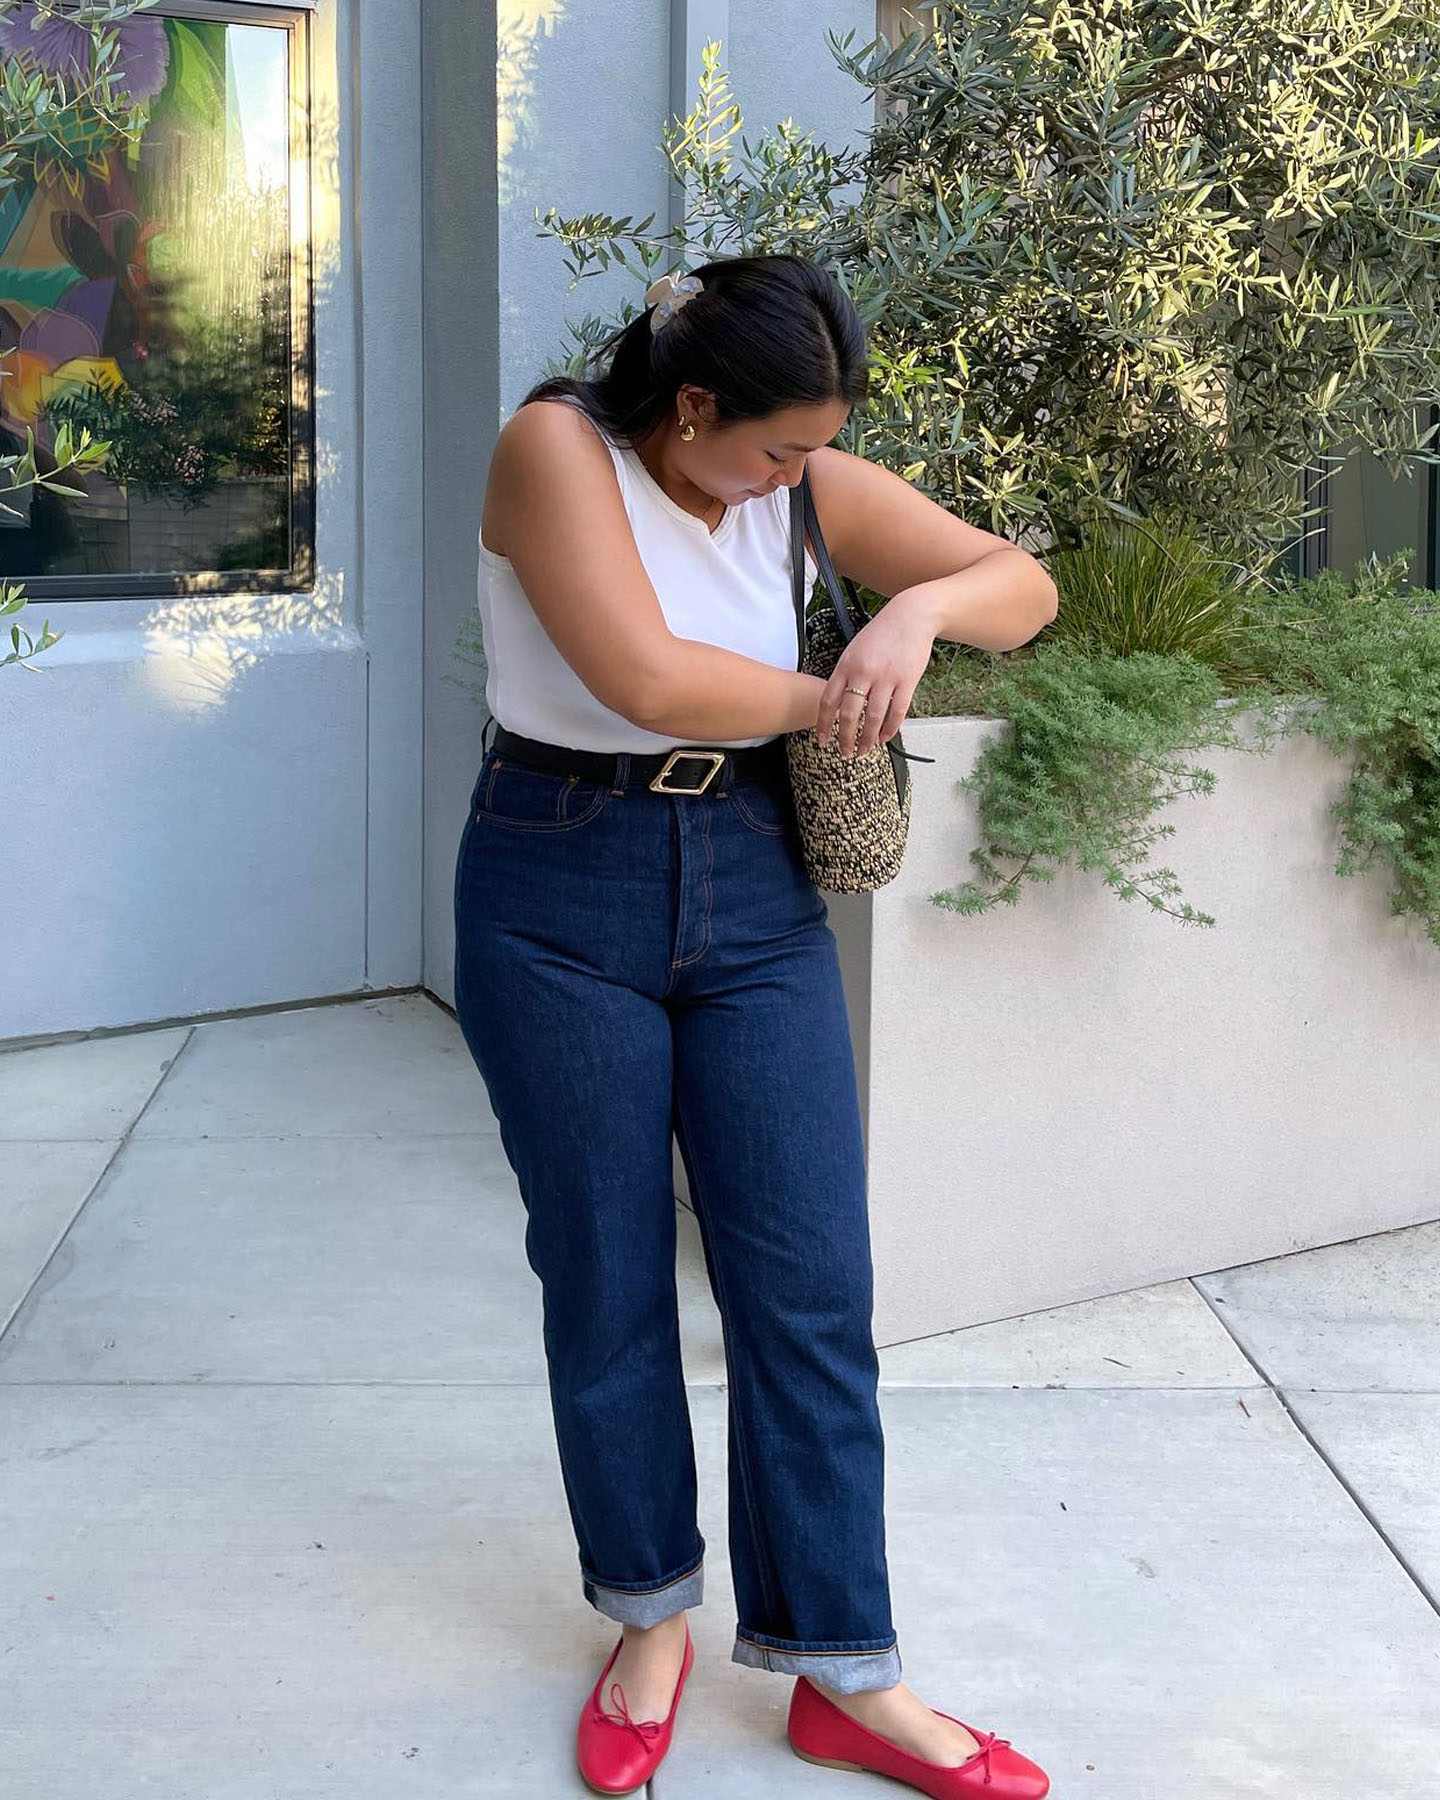 influencer Marina Torres poses in a warm-weather outfit with a claw hair clip, white tank top, basket bag, belted high-waist cuffed jeans, and red ballet flats